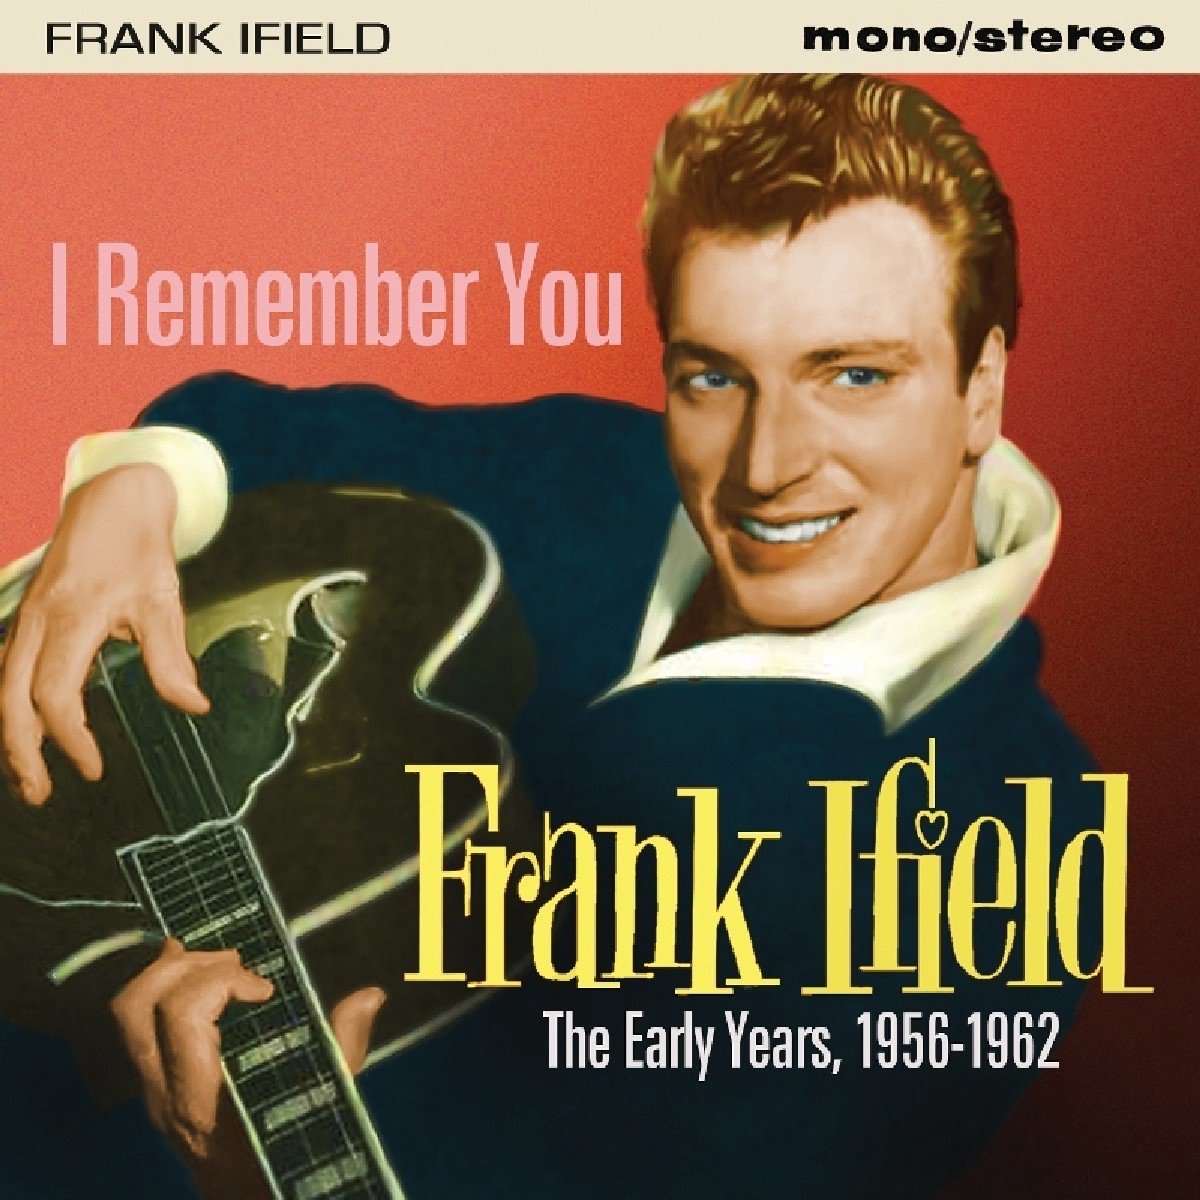 Frank Ifield - I Remember You. The Earlyyears 1956-1962 (CD) - Frank Ifield